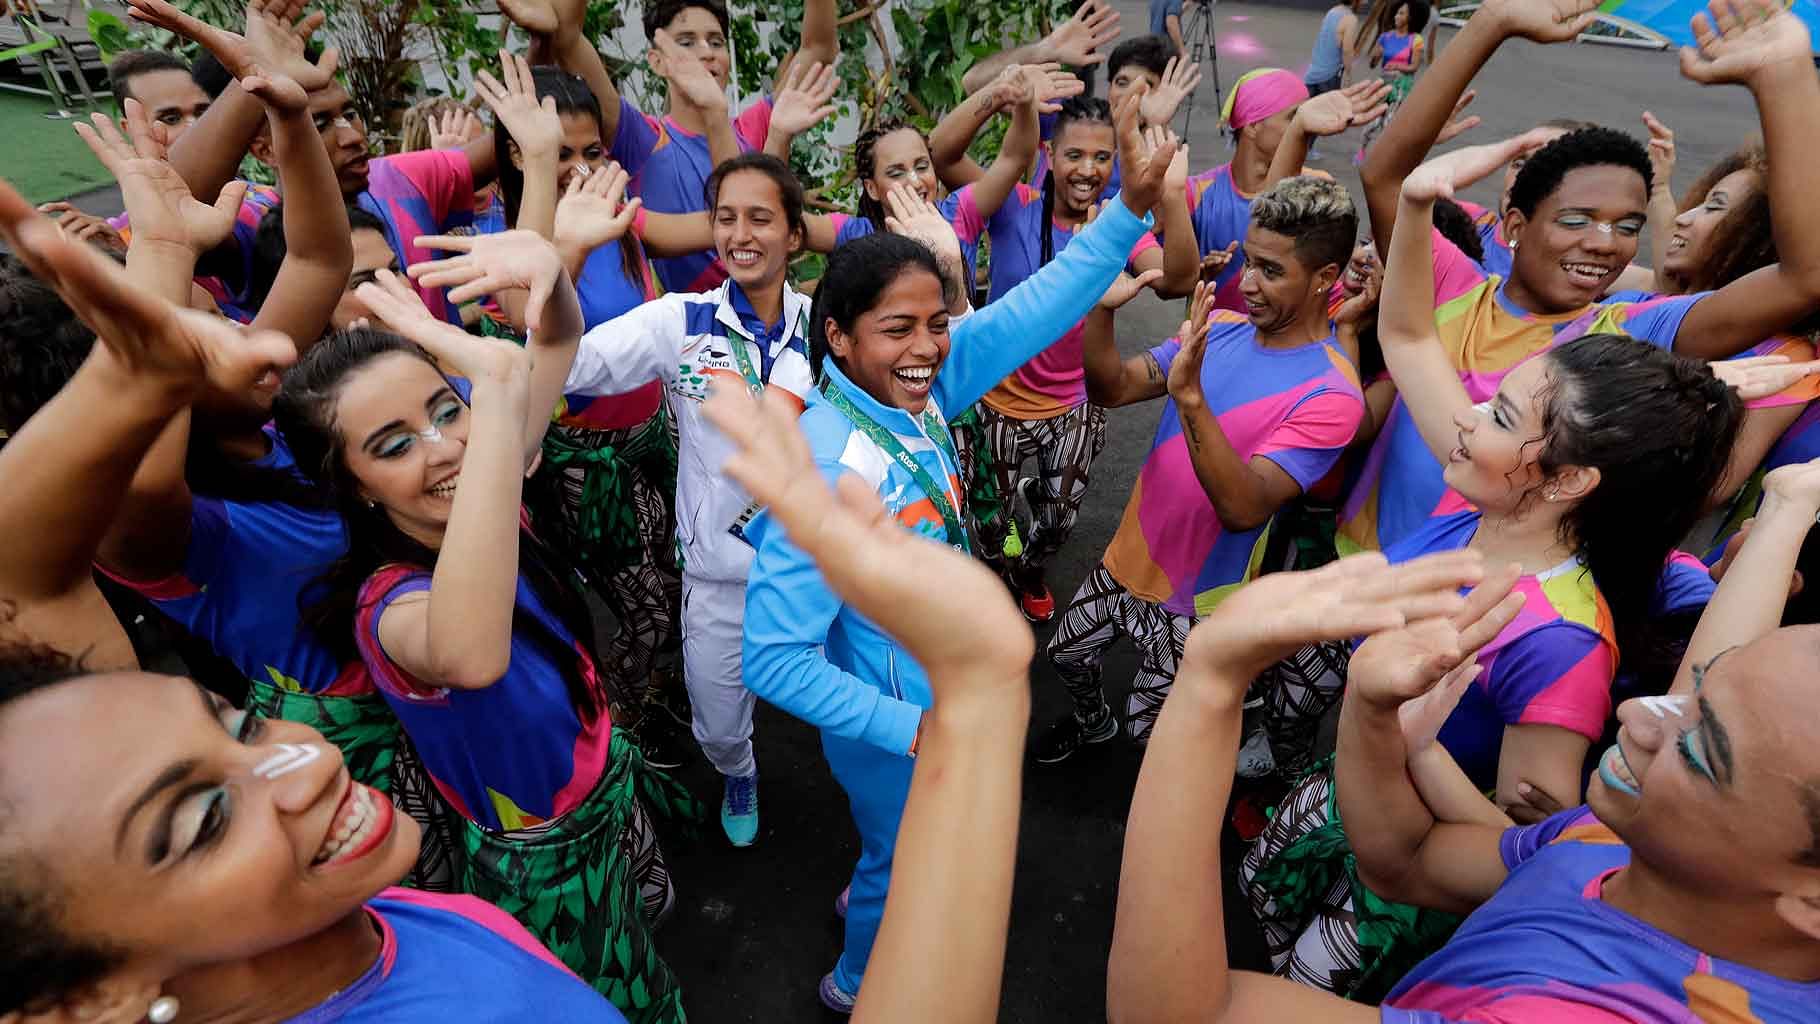 

Indian field hockey players Deepika, center right, and Preety Dubey, center left, dance with performers after a welcome ceremony at the Olympic athletes village in Rio de Janeiro, Brazil. (Photo: AP)